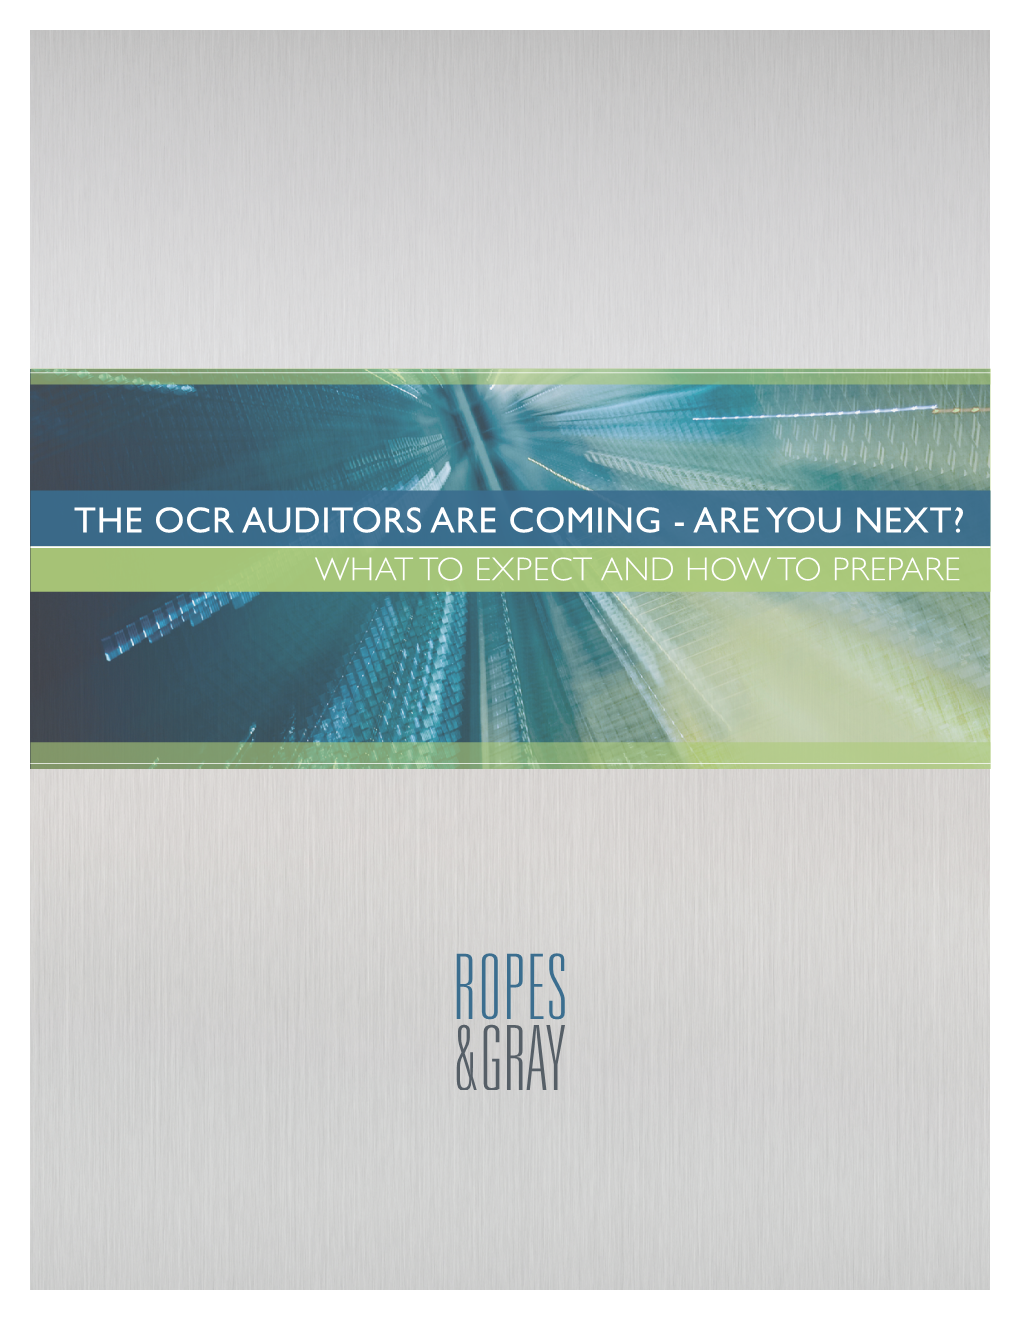 The OCR Auditors Are Coming - Are You Next? What to Expect and How to Prepare on June 10, 2011, the U.S